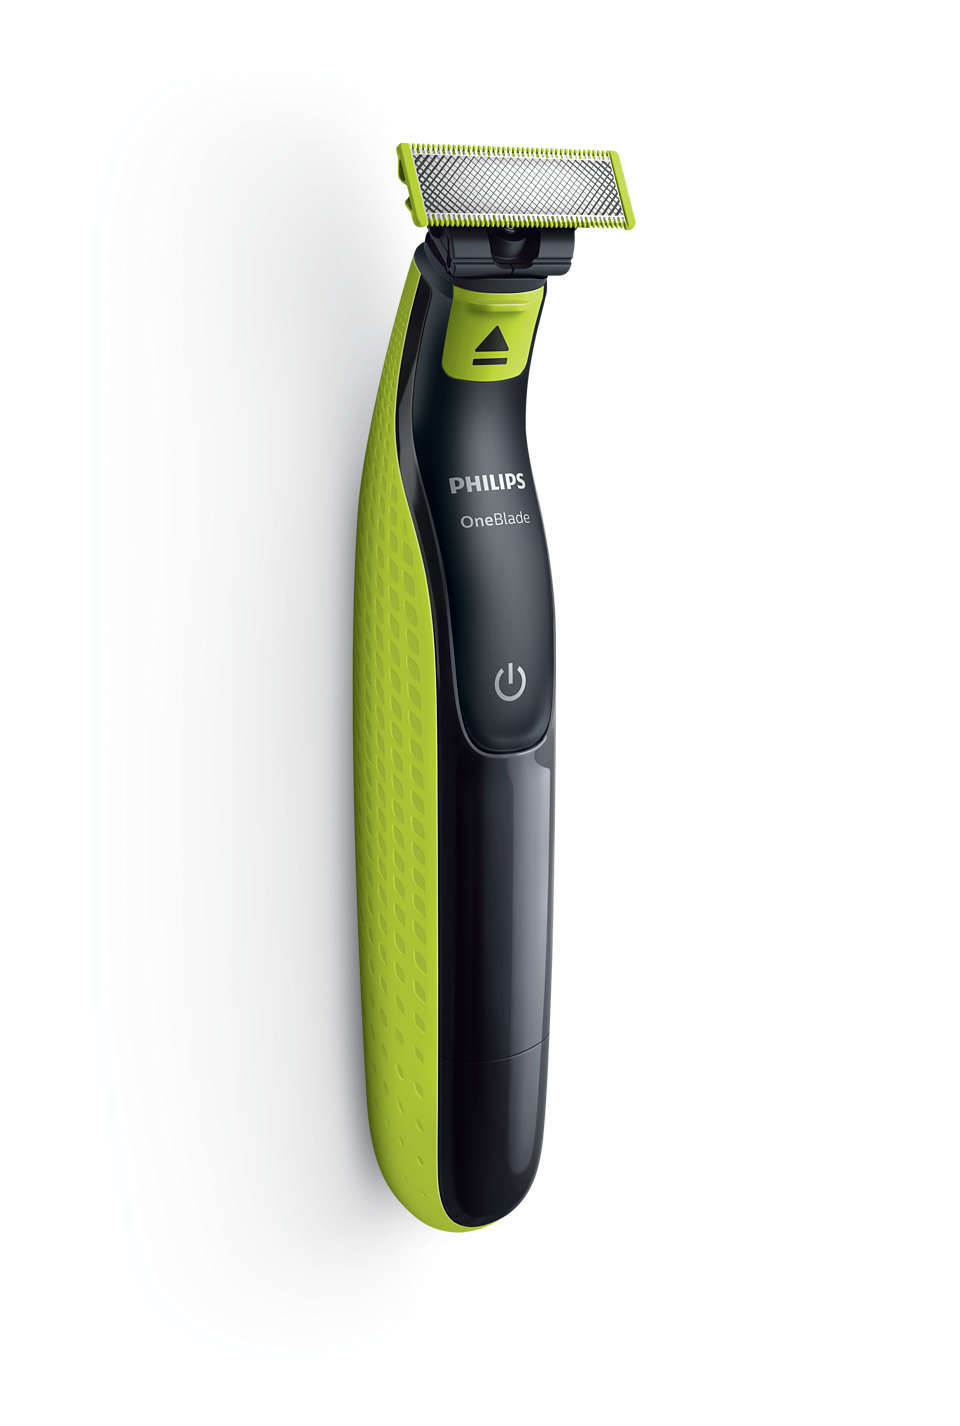 Philips QP2525/10 OneBlade Shaver and Trimmer 